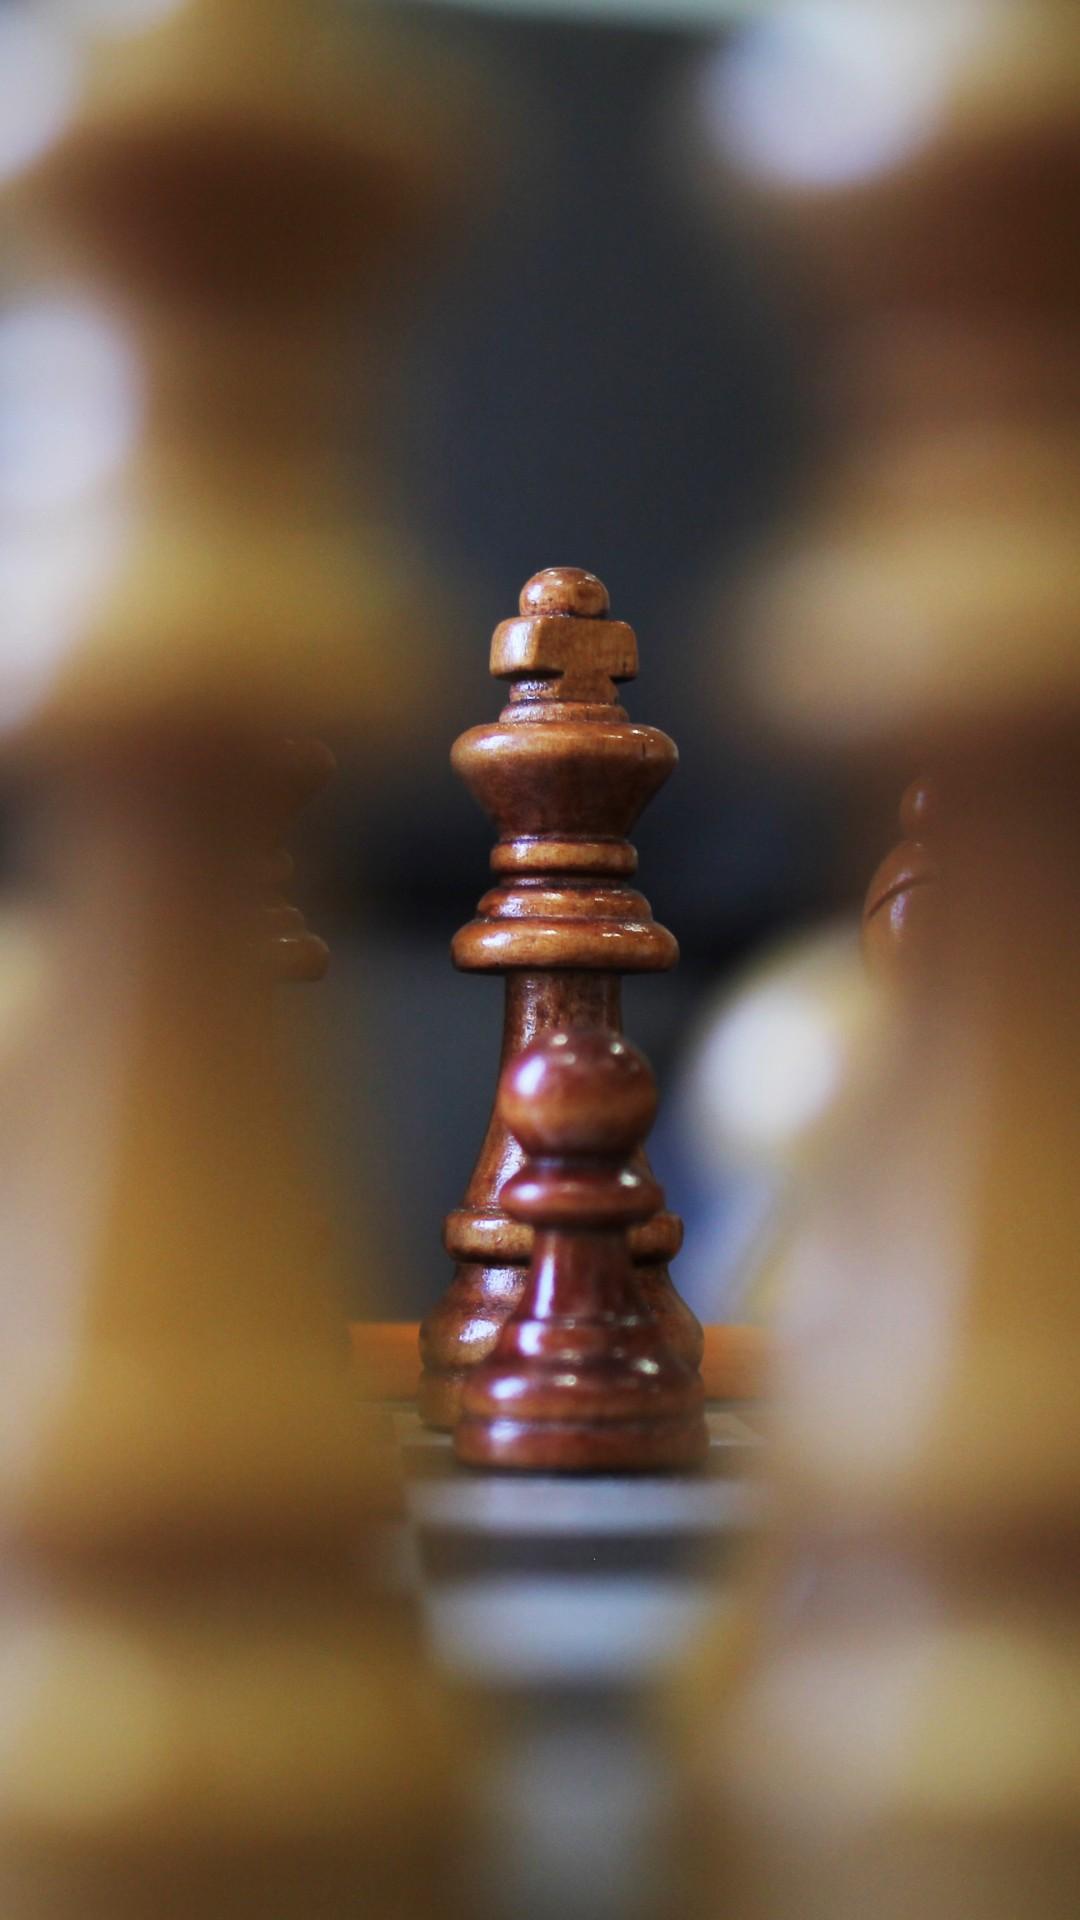 Chess Pieces HD Wallpaper for Desktop and Mobiles iPhone 6 / 6S Plus